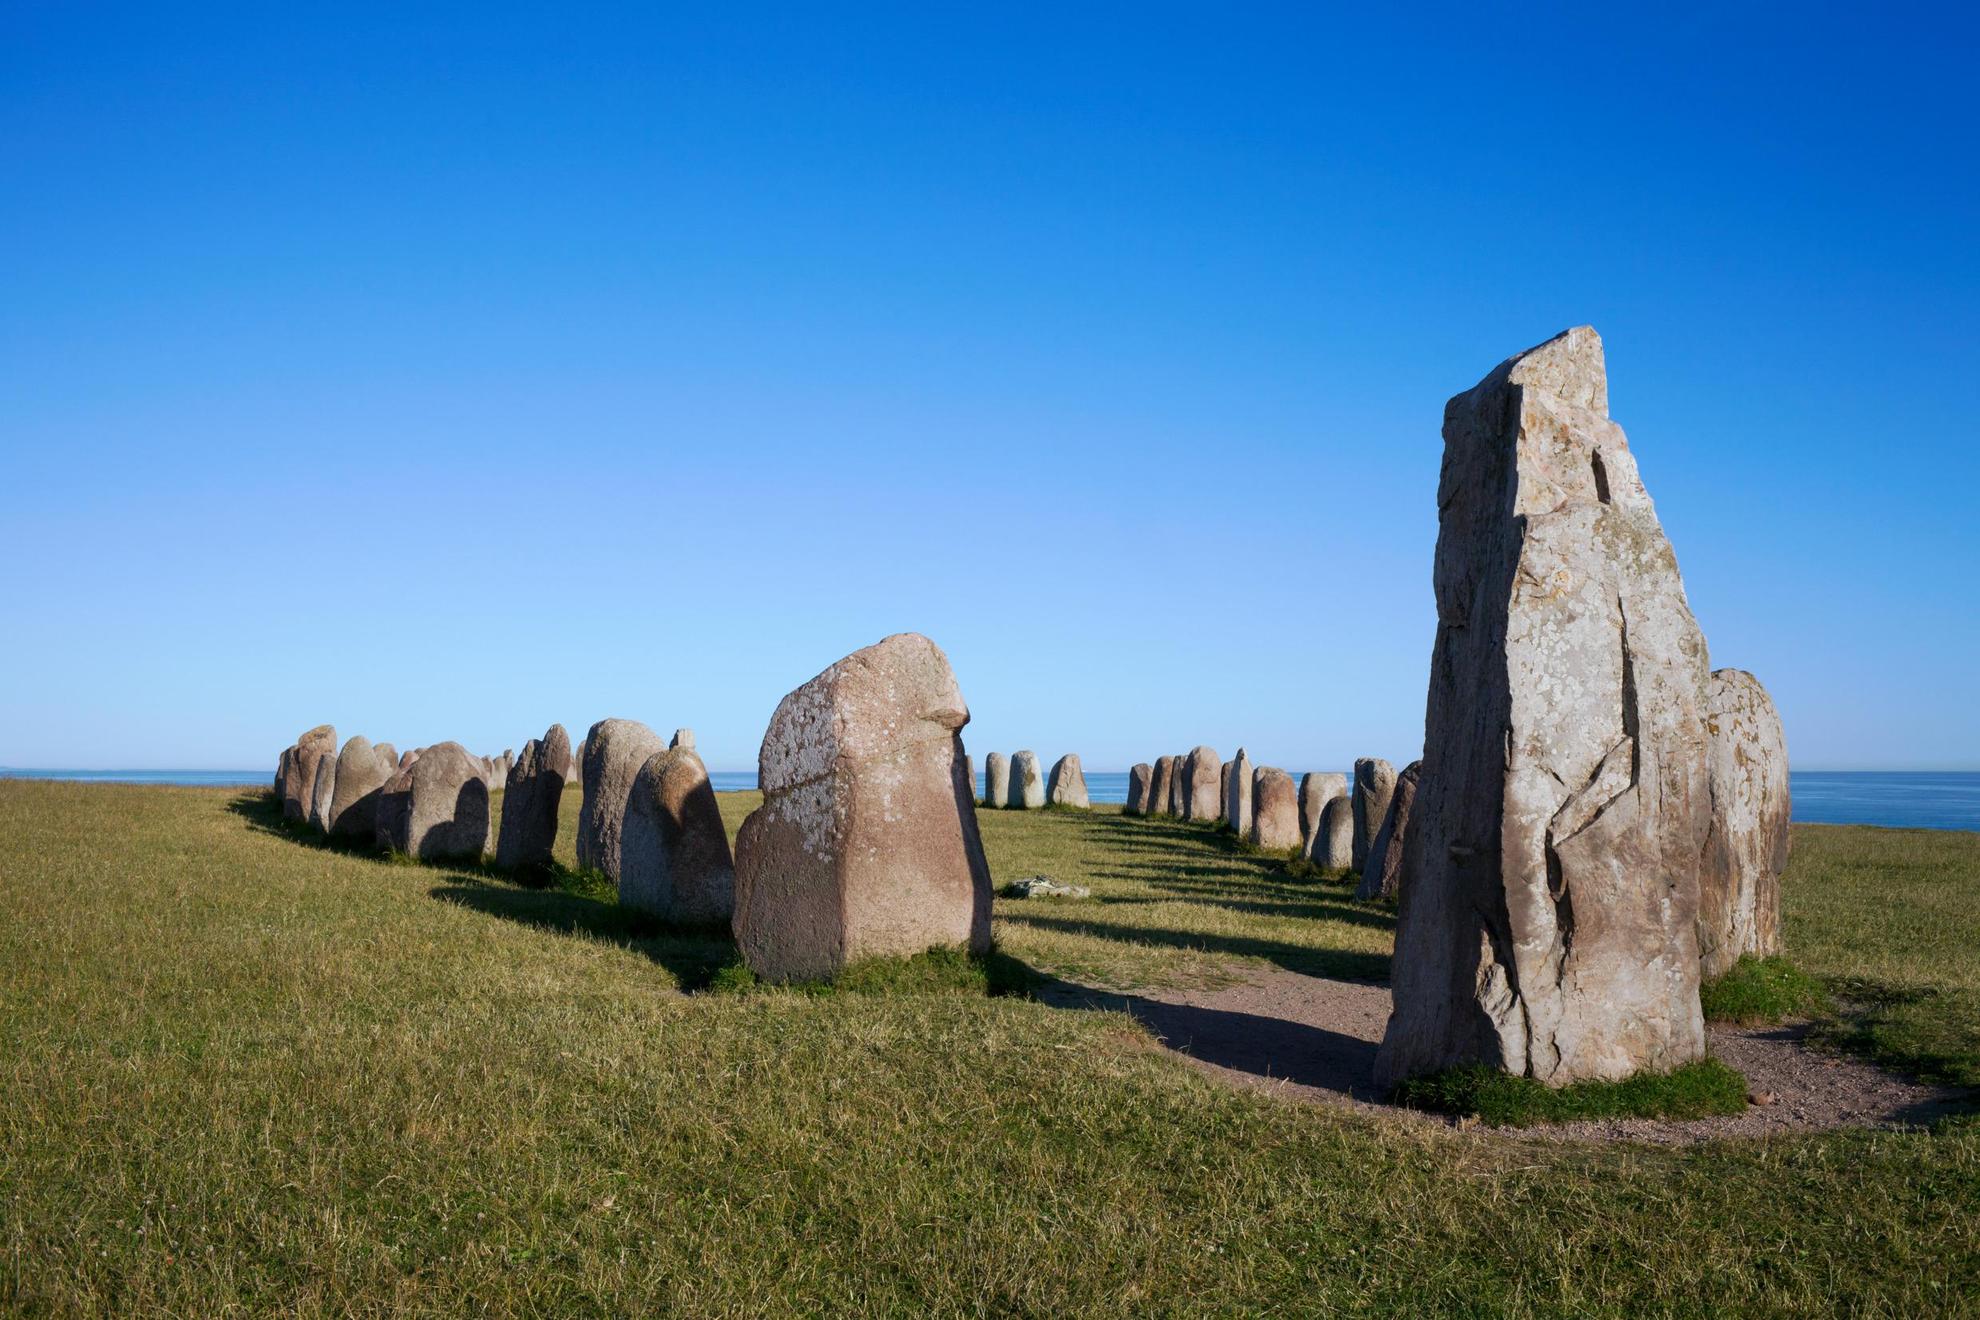 The Ale Stones stand on a field with the ocean in the background.